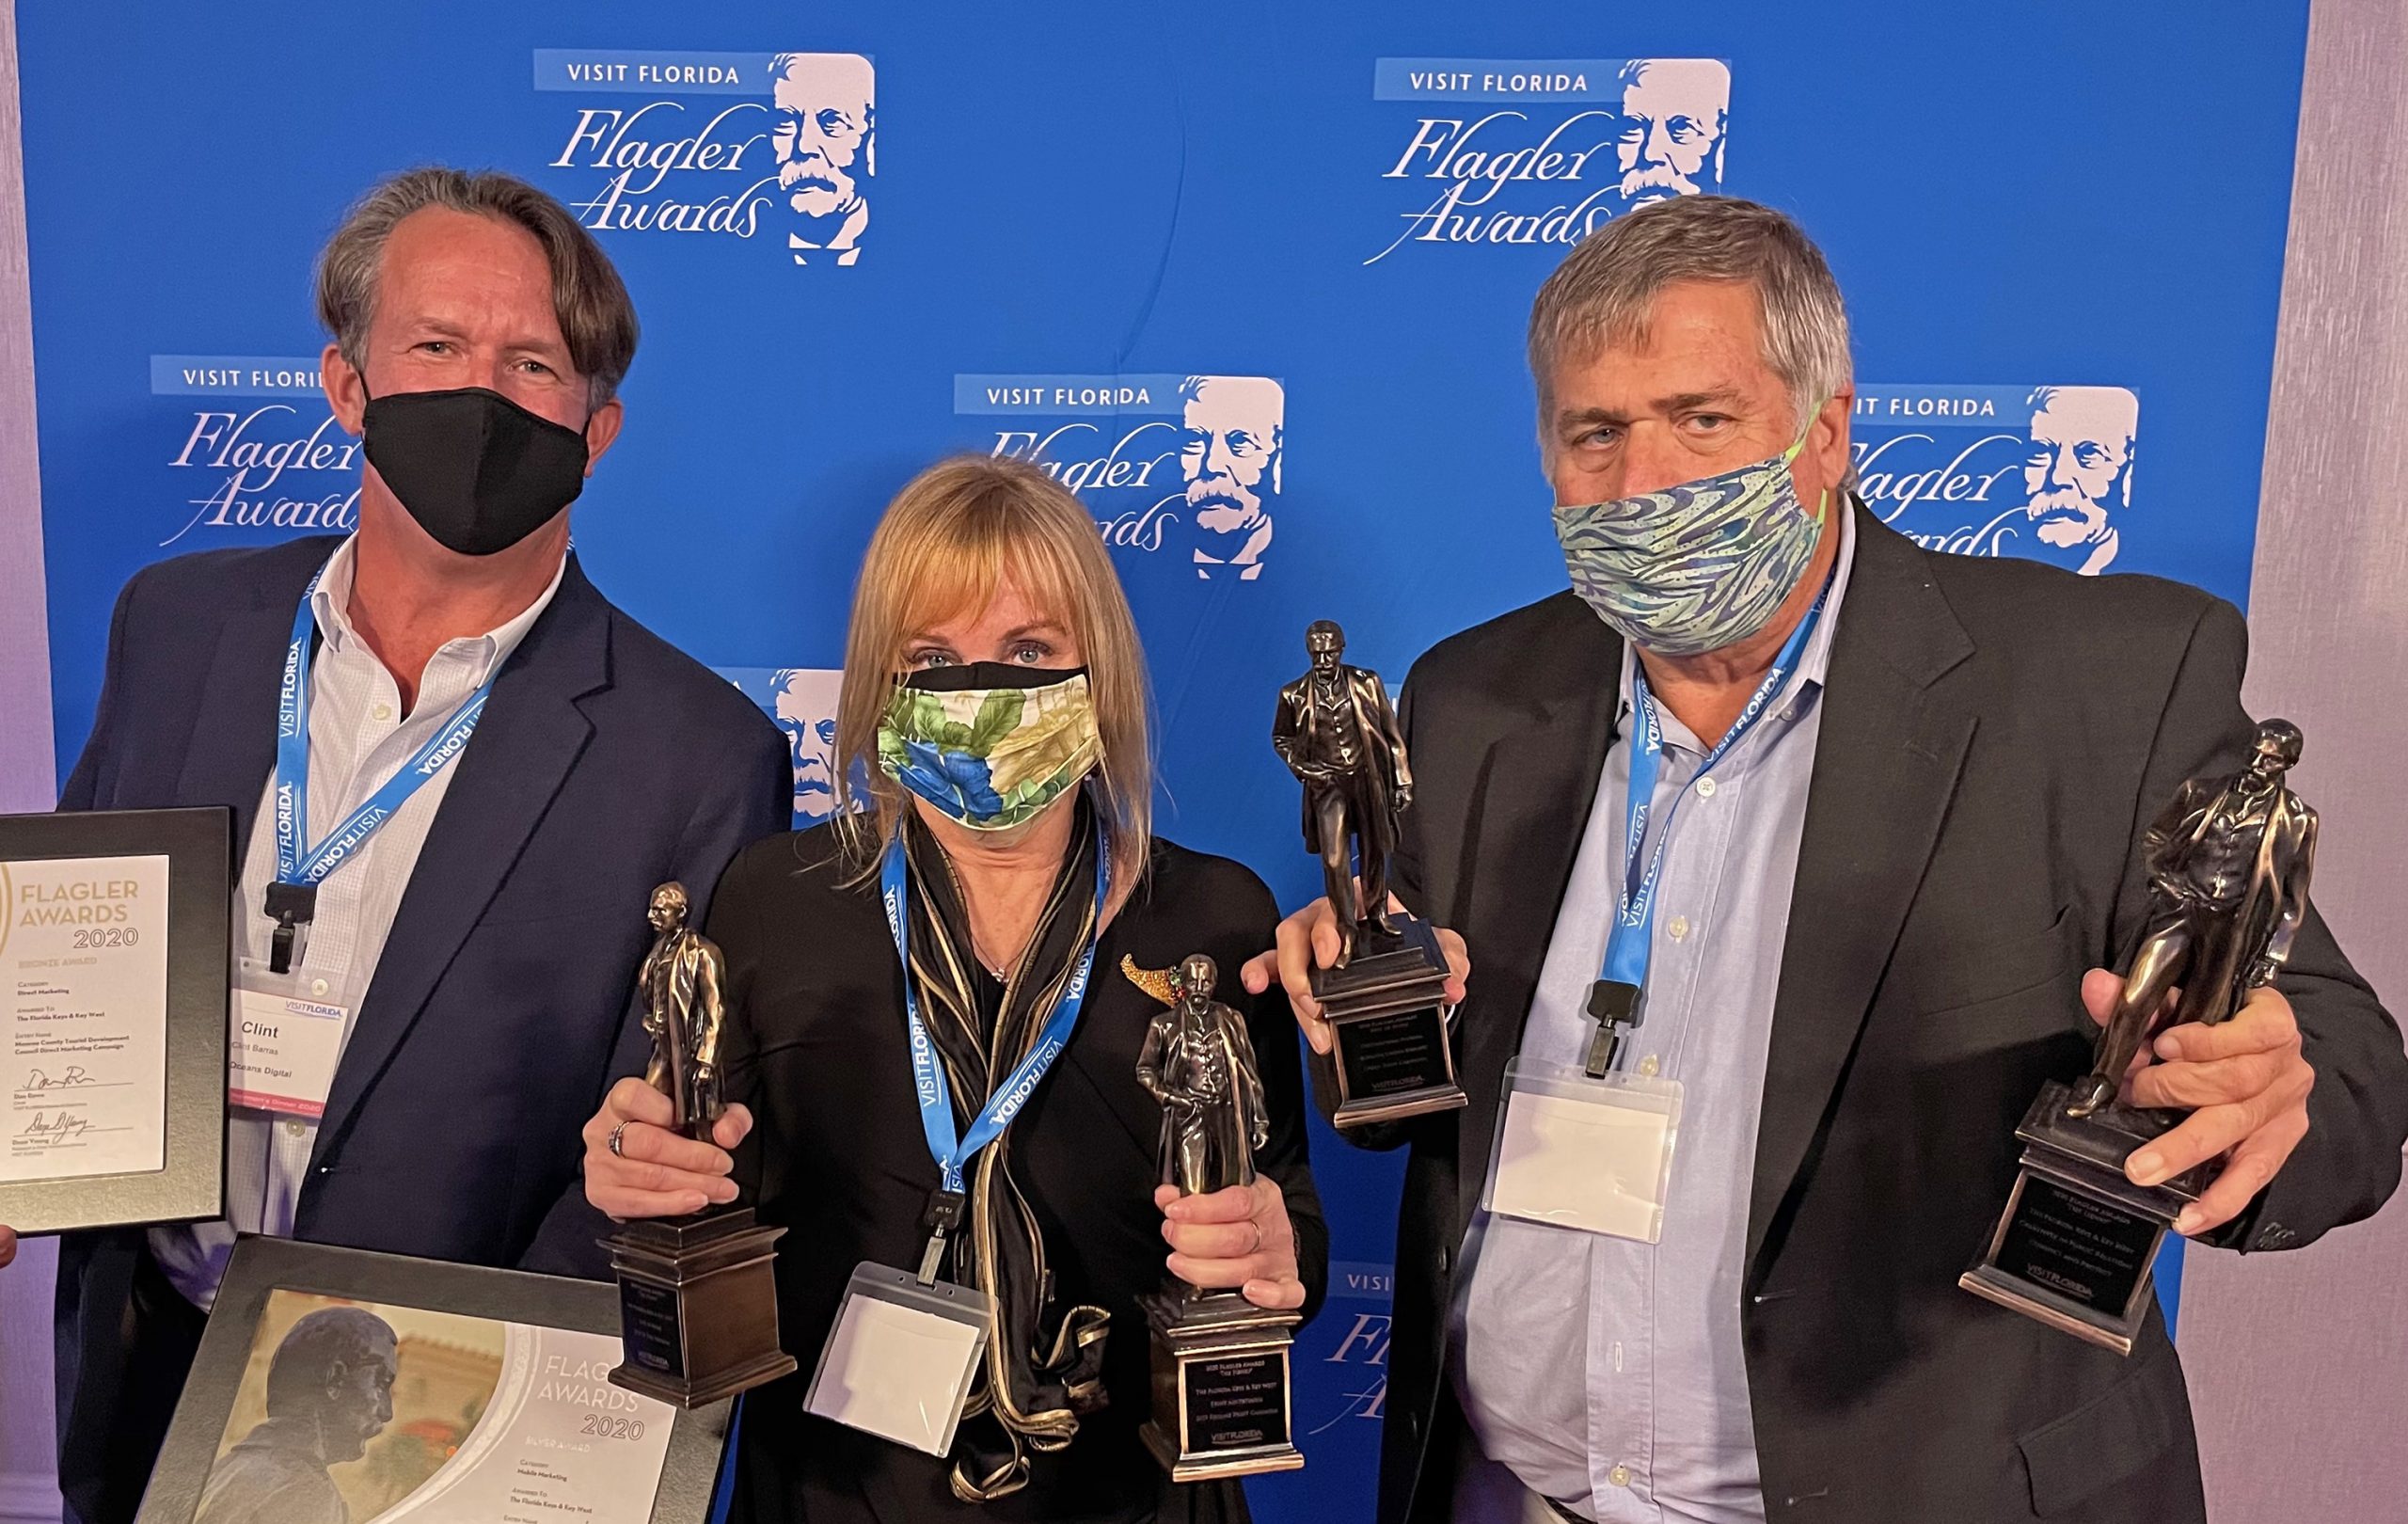 Flagler Award winners for travel marketing and public relations